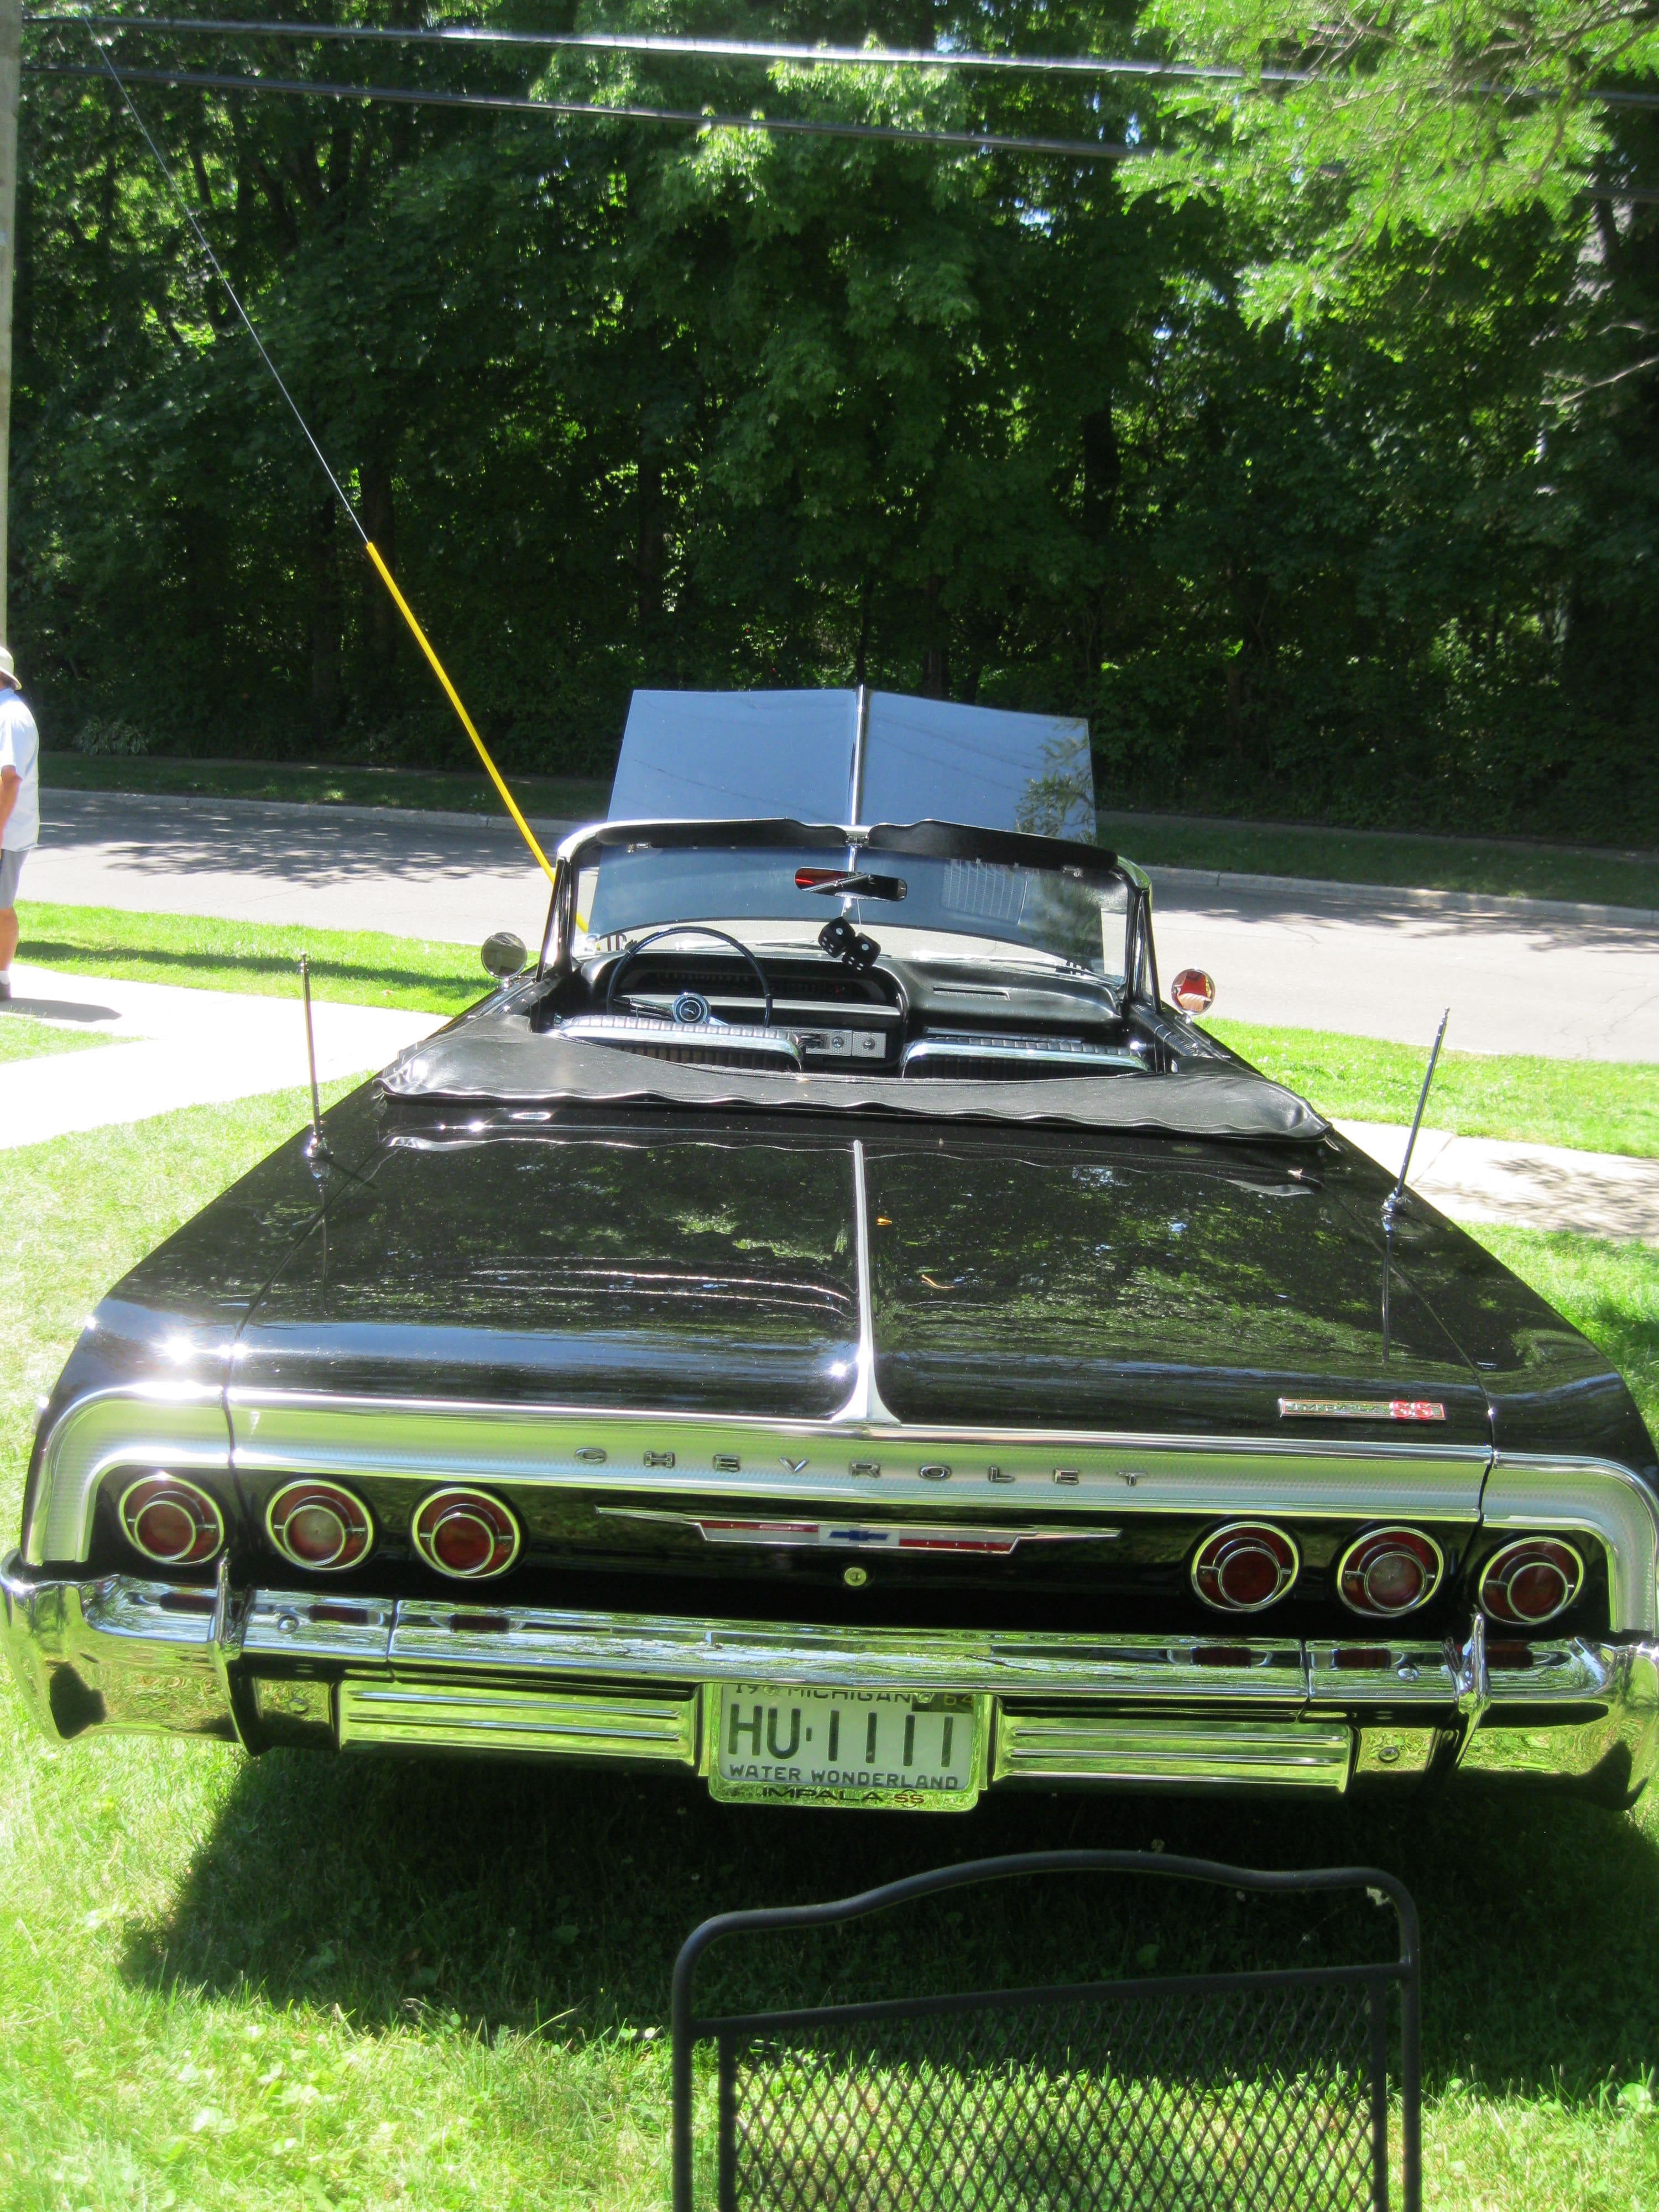 A 1964 Chevrolet Impala SS convertible owned by Victor Dragna of St. Clair Shores.